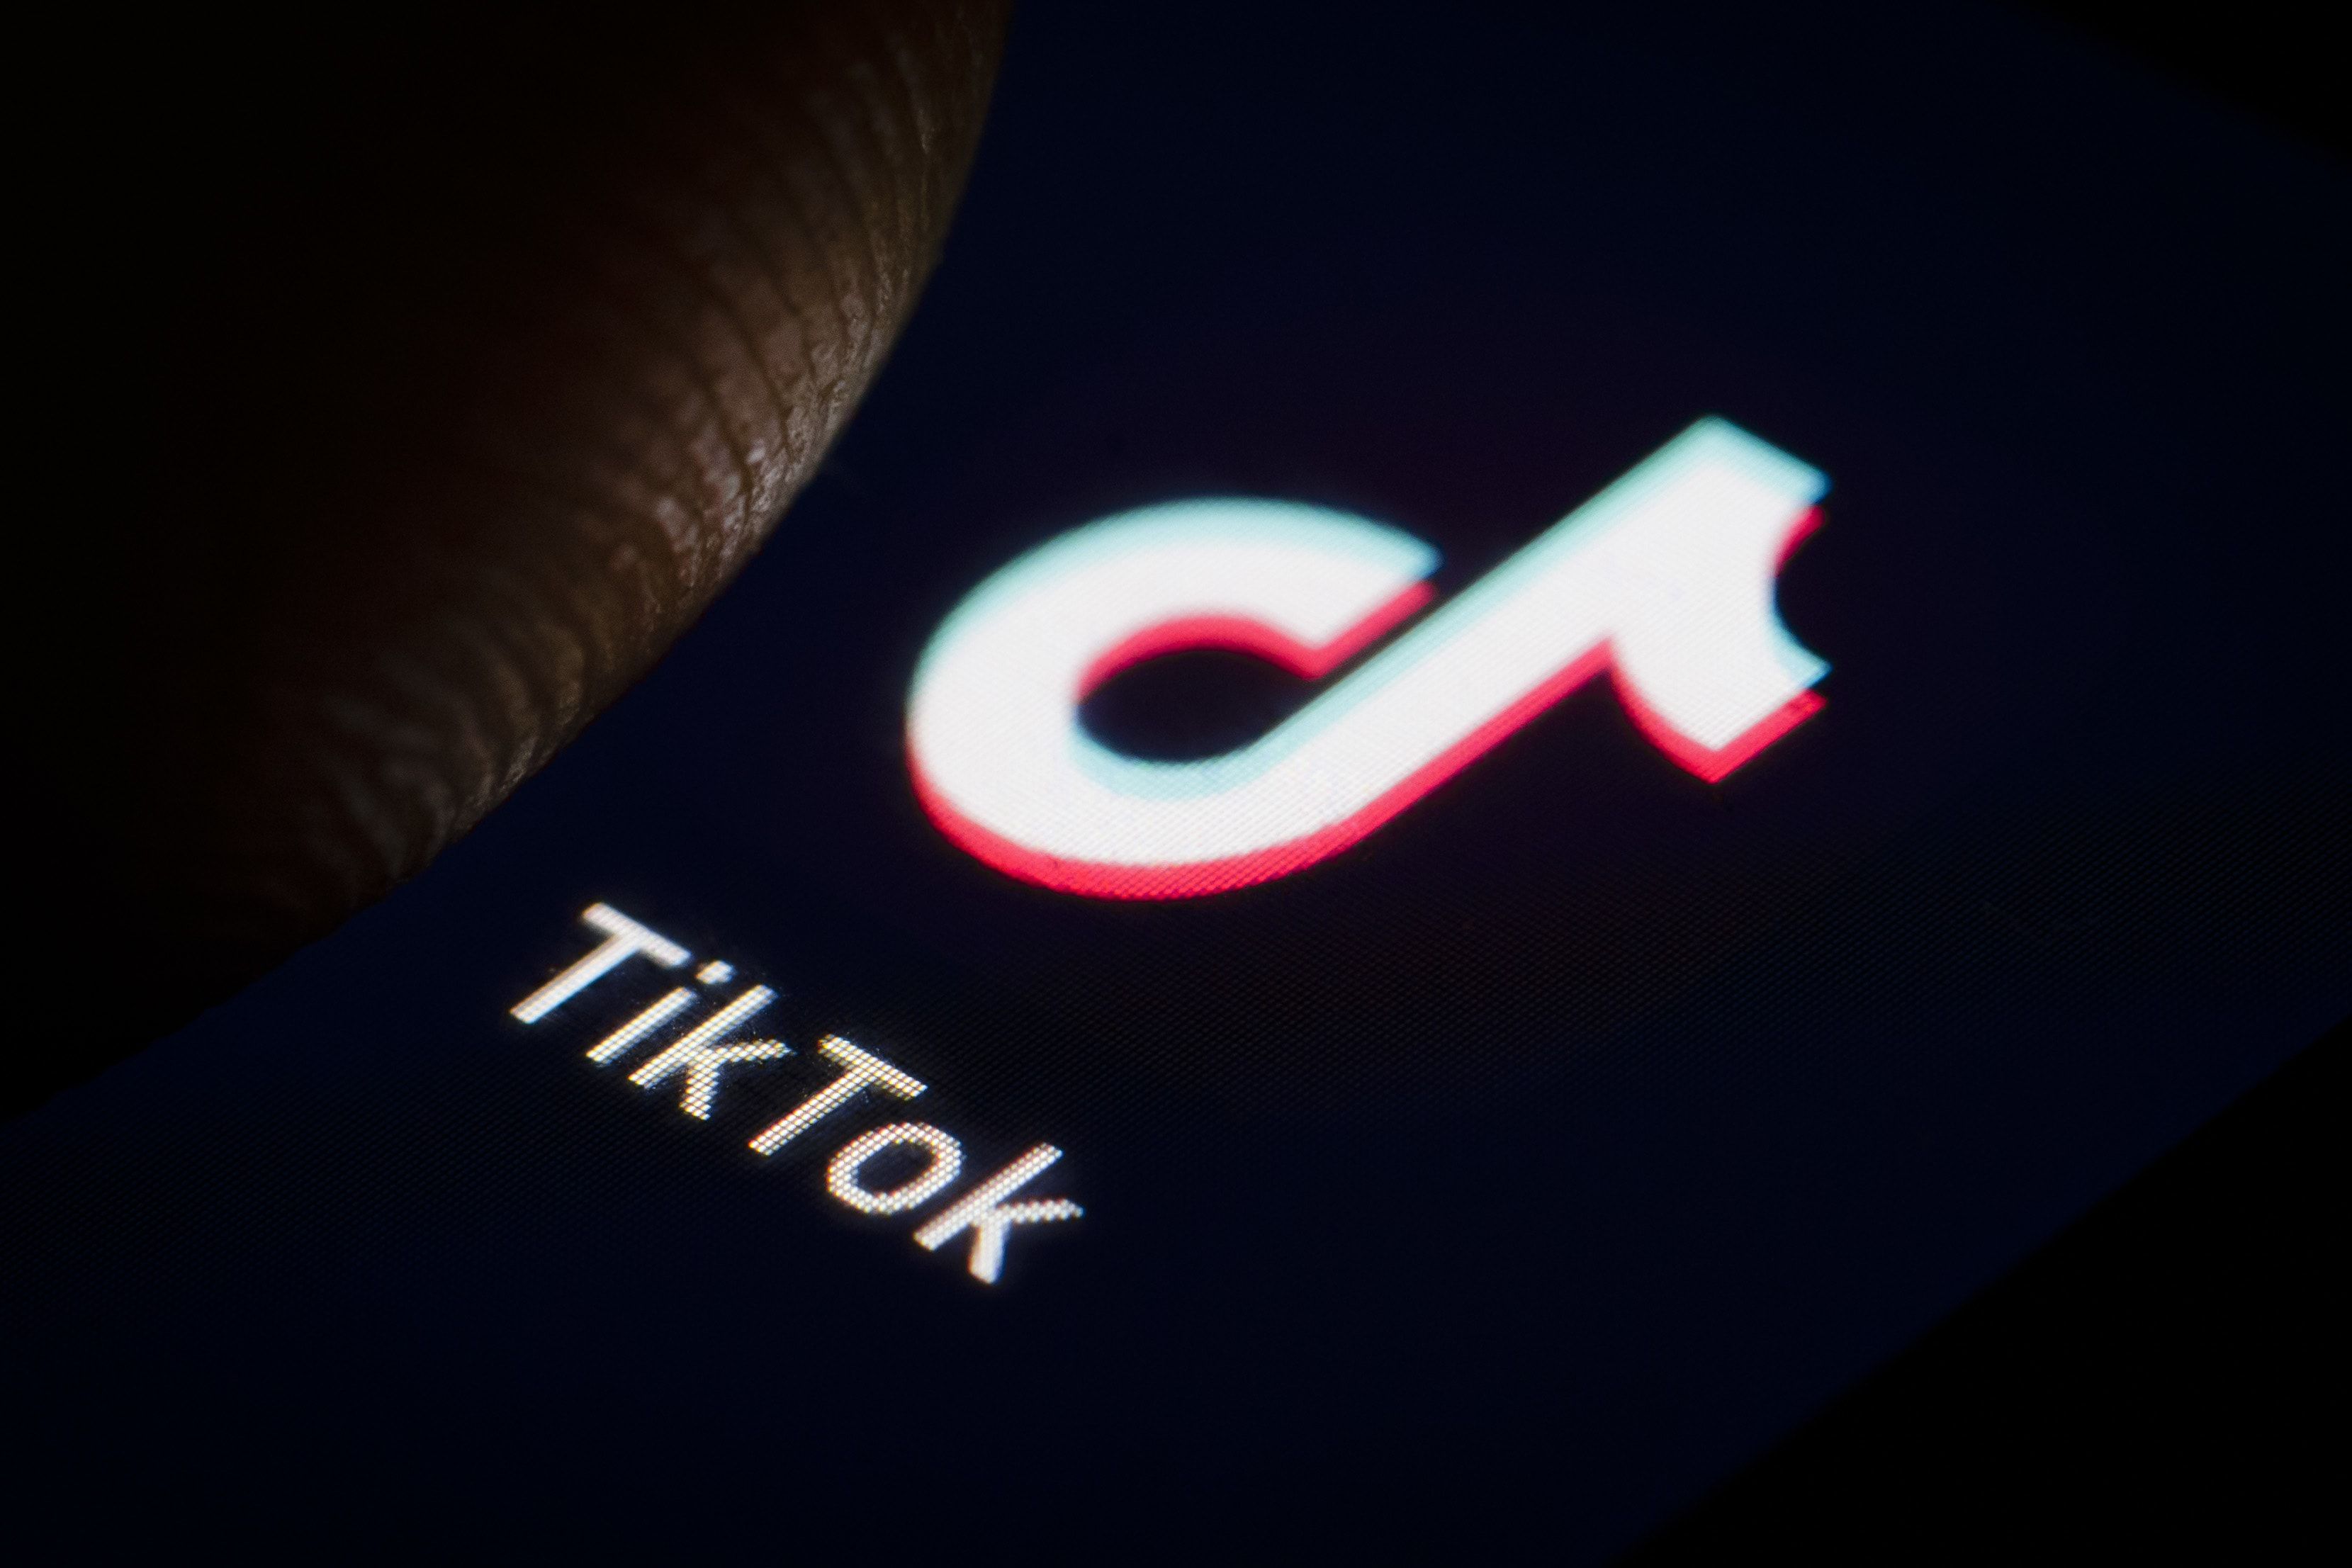 TikTok owner ByteDance: What to know about the Chinese tech giant